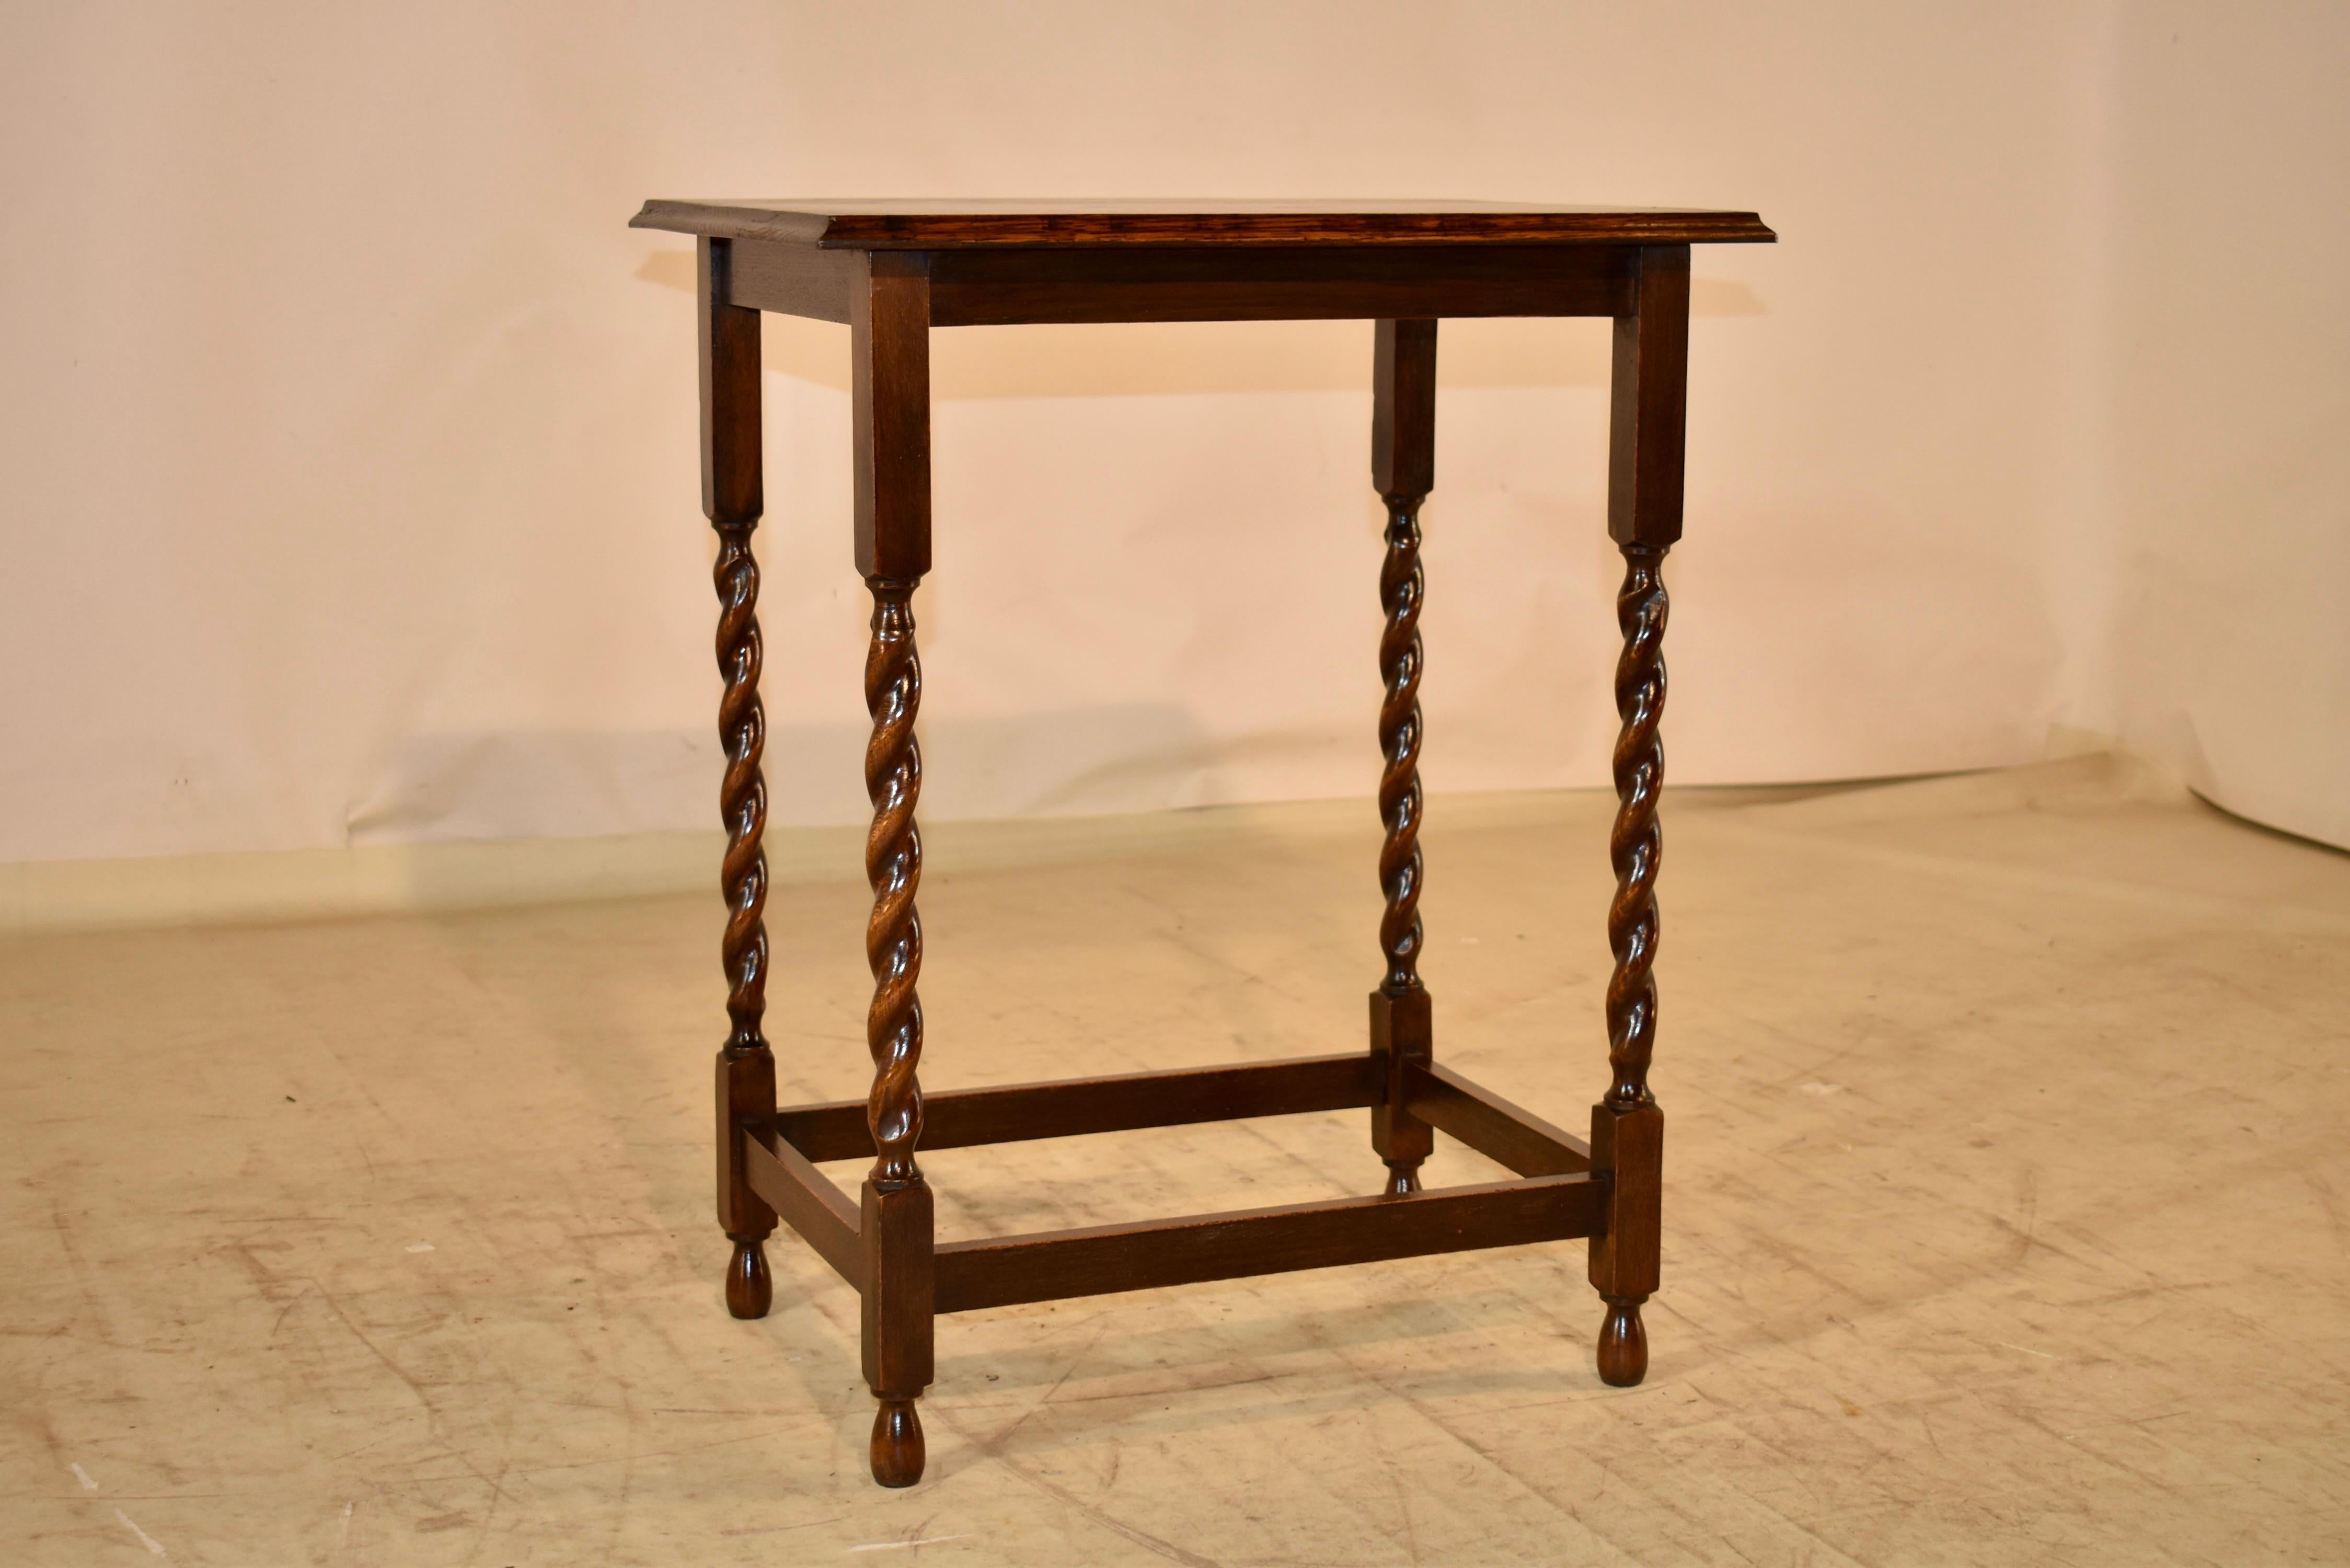 Circa 1900-1910 oak occasional or side table from England.  The top has magnificent graining, and is surrounded by an elegant beveled edge.  This follows down to a simple apron and the table is supported on hand turned barley twist legs, joined by